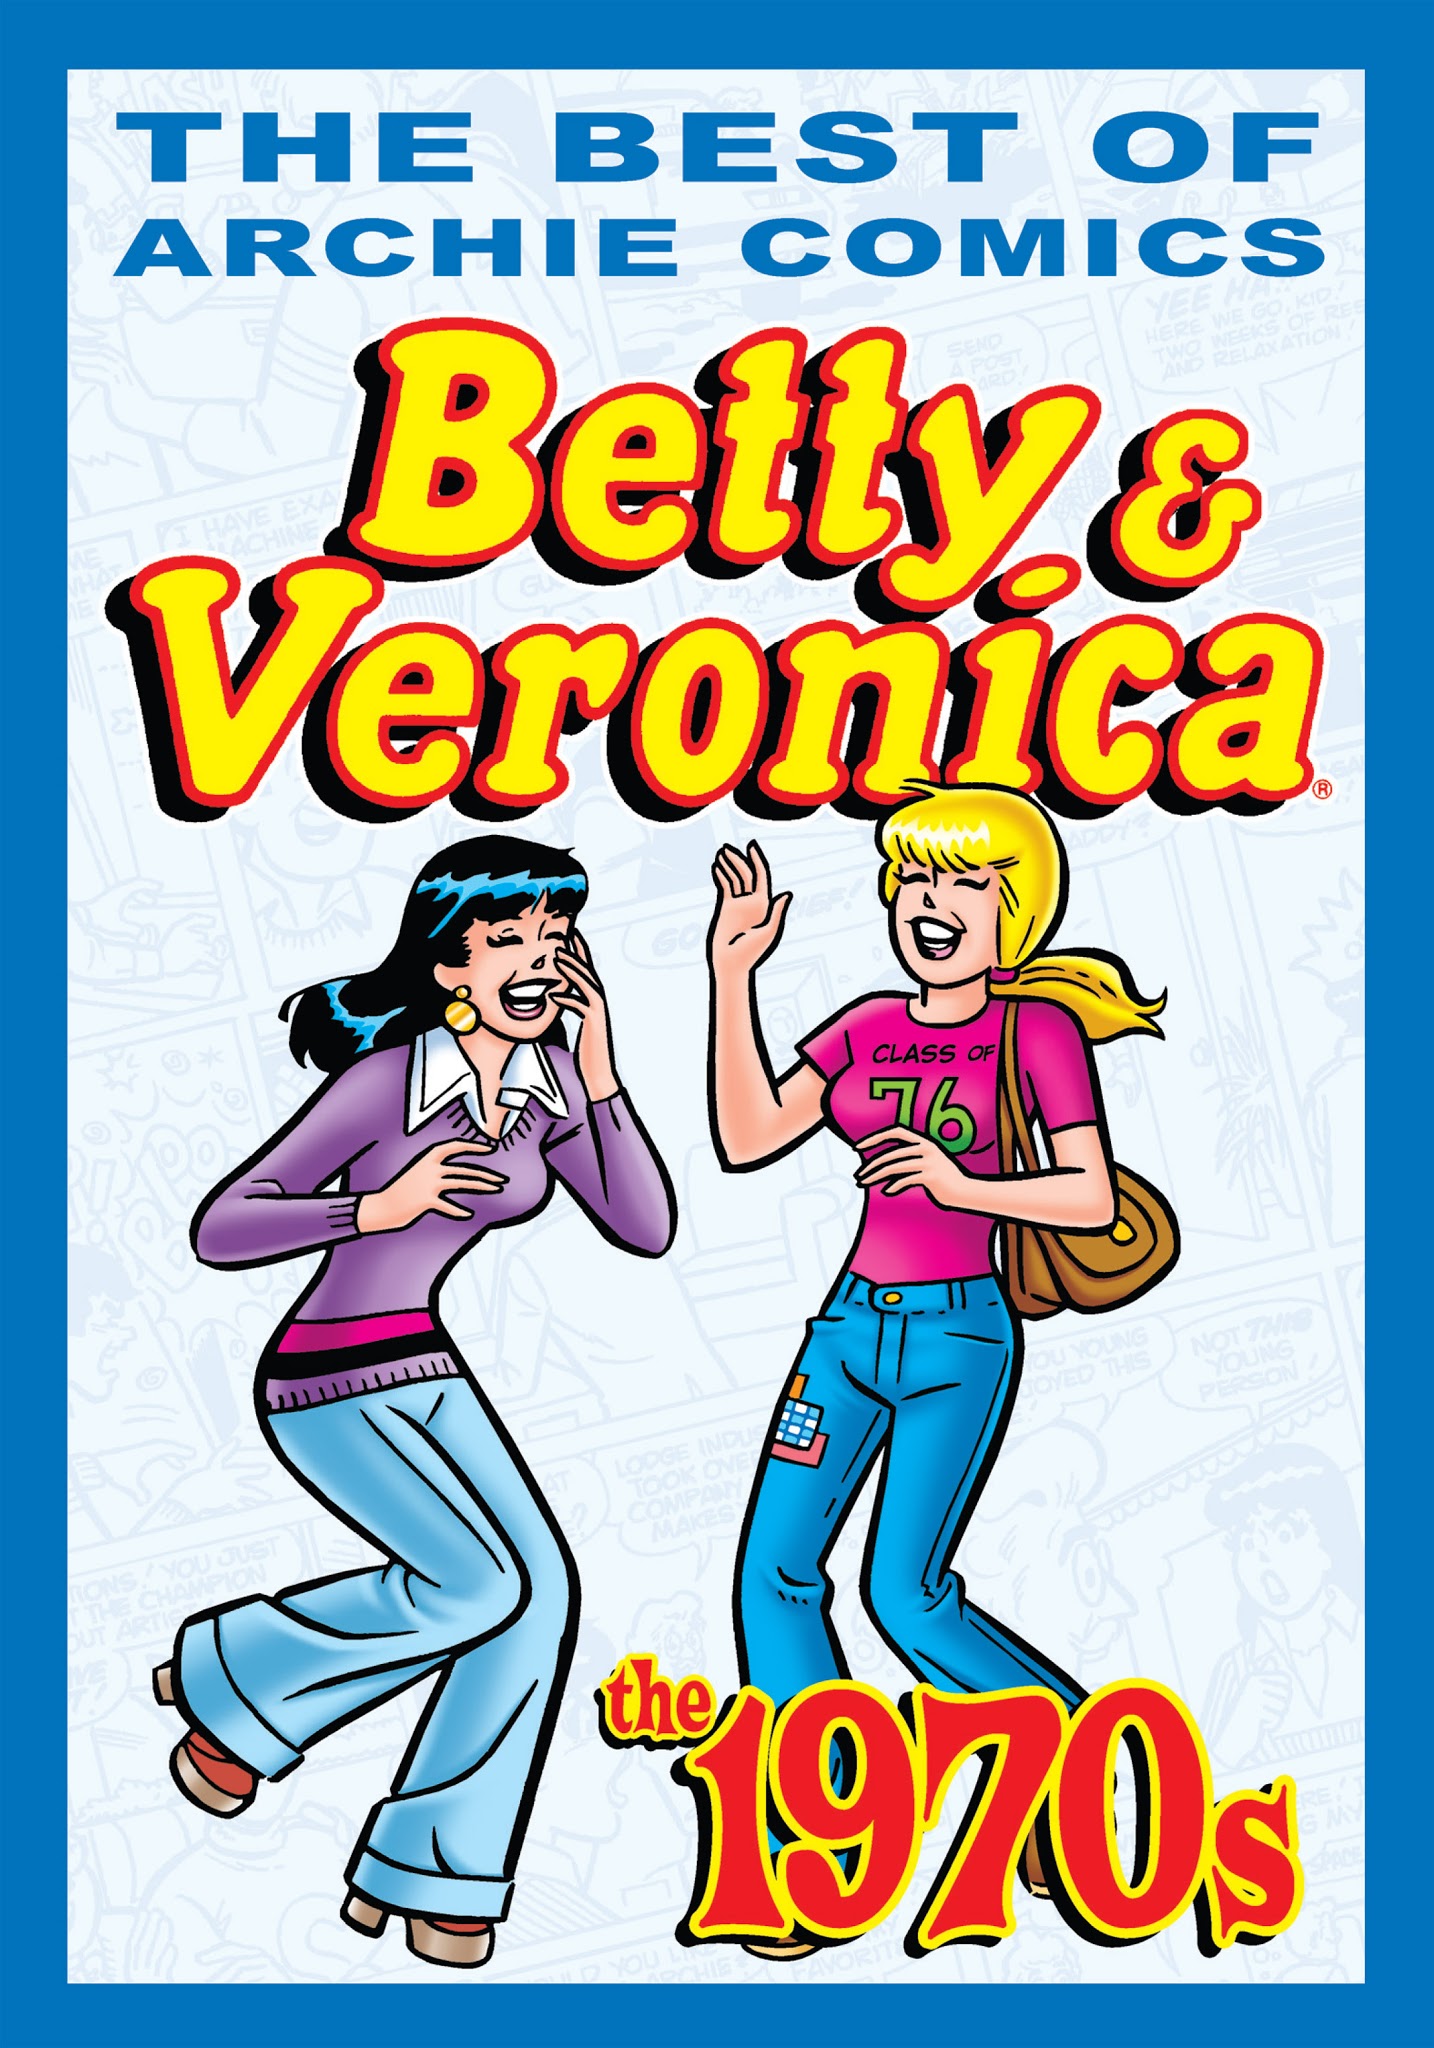 Read online The Best of Archie Comics: Betty & Veronica comic -  Issue # TPB - 176